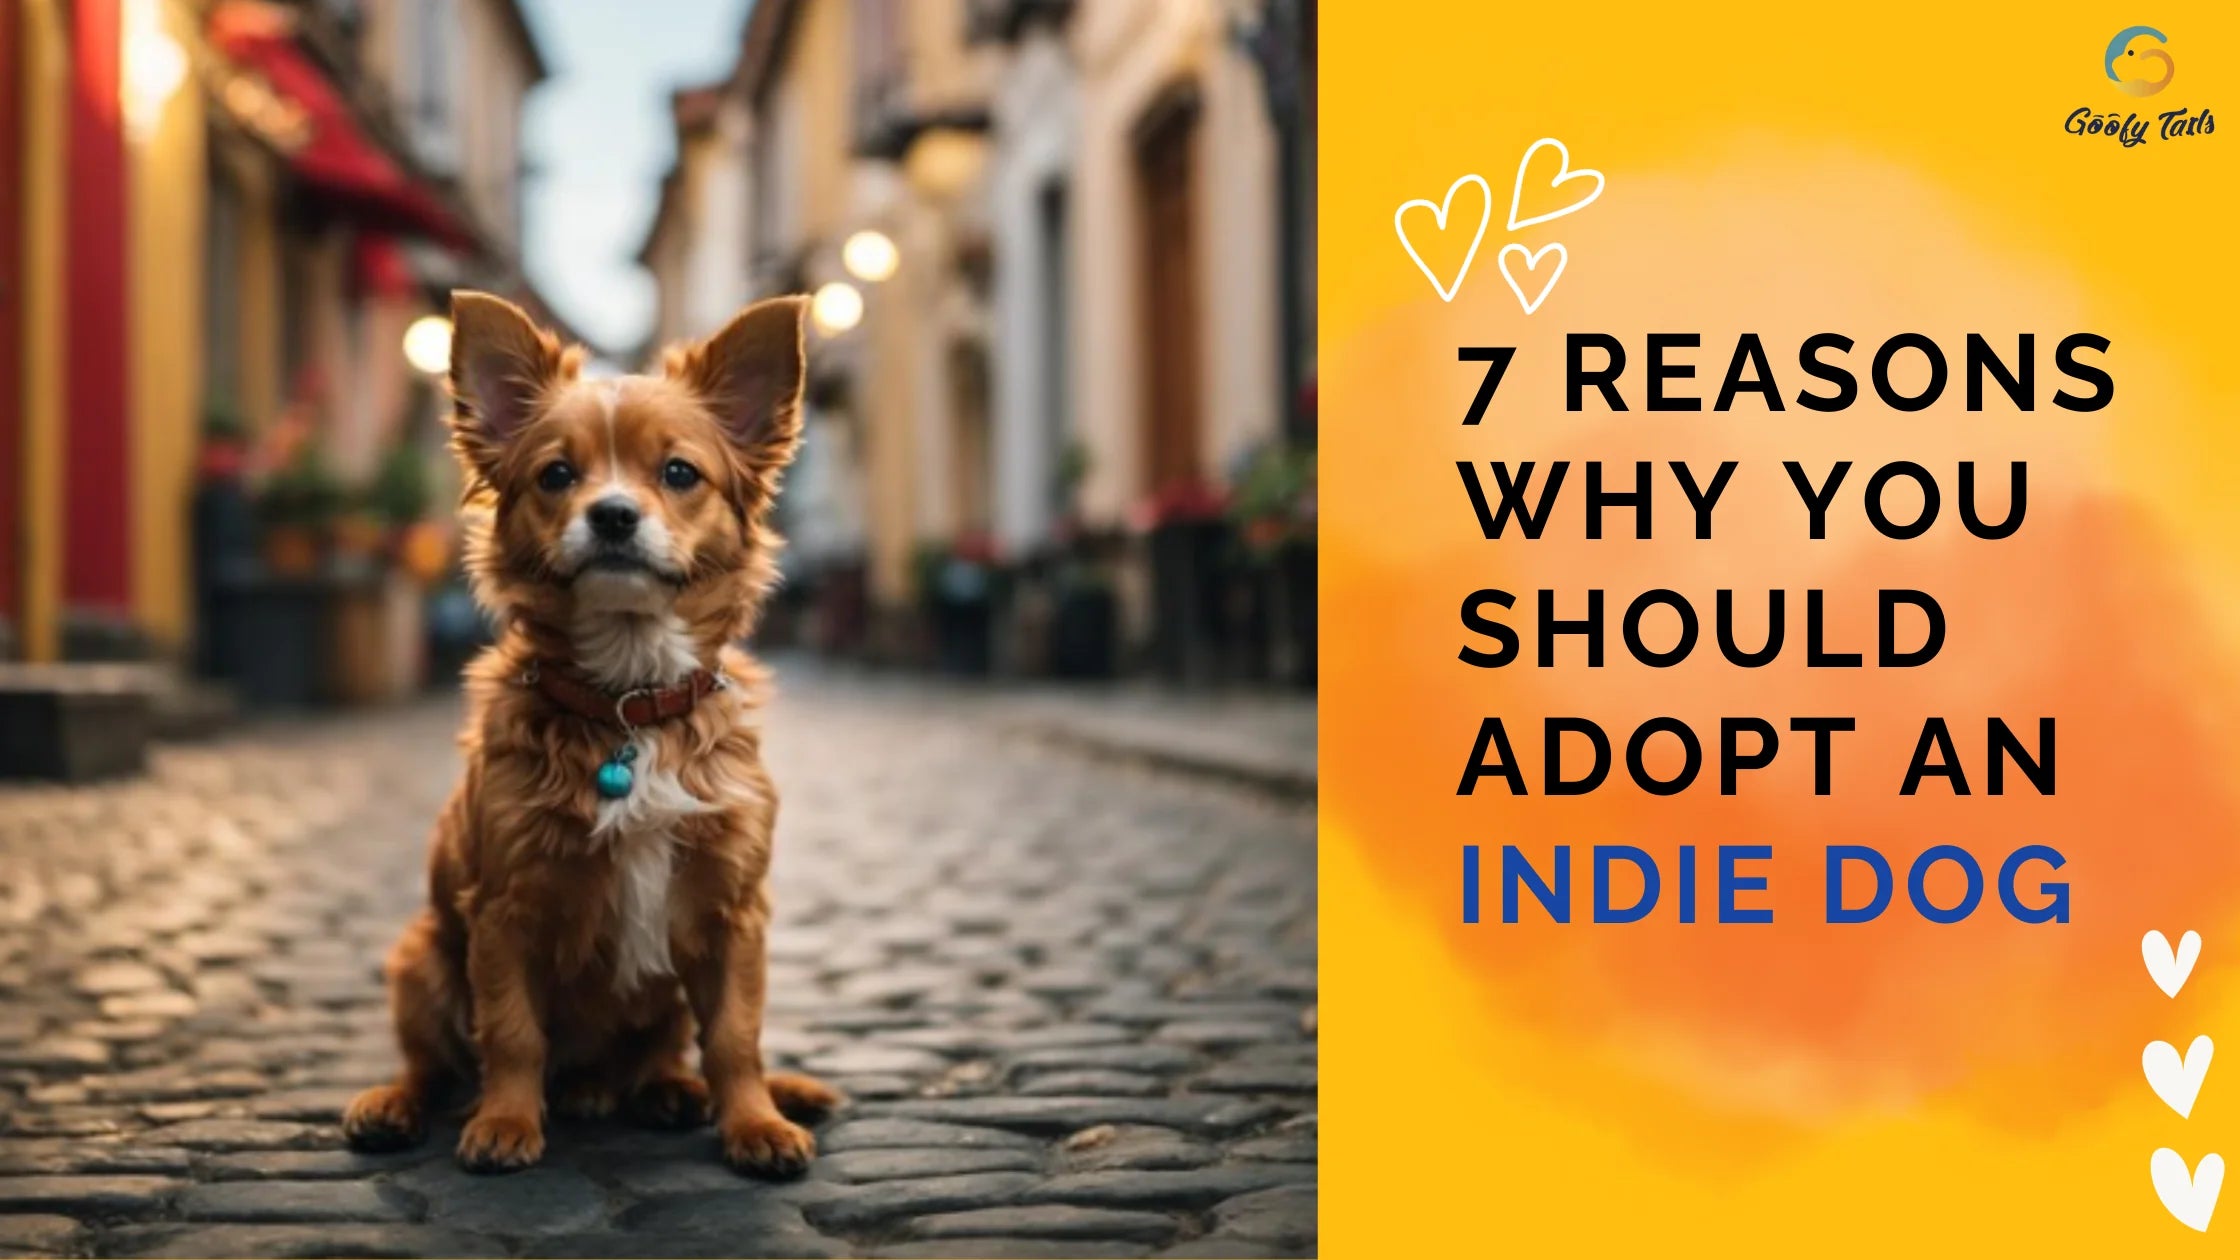 7 Reasons Why You Should Adopt an Indie Dog